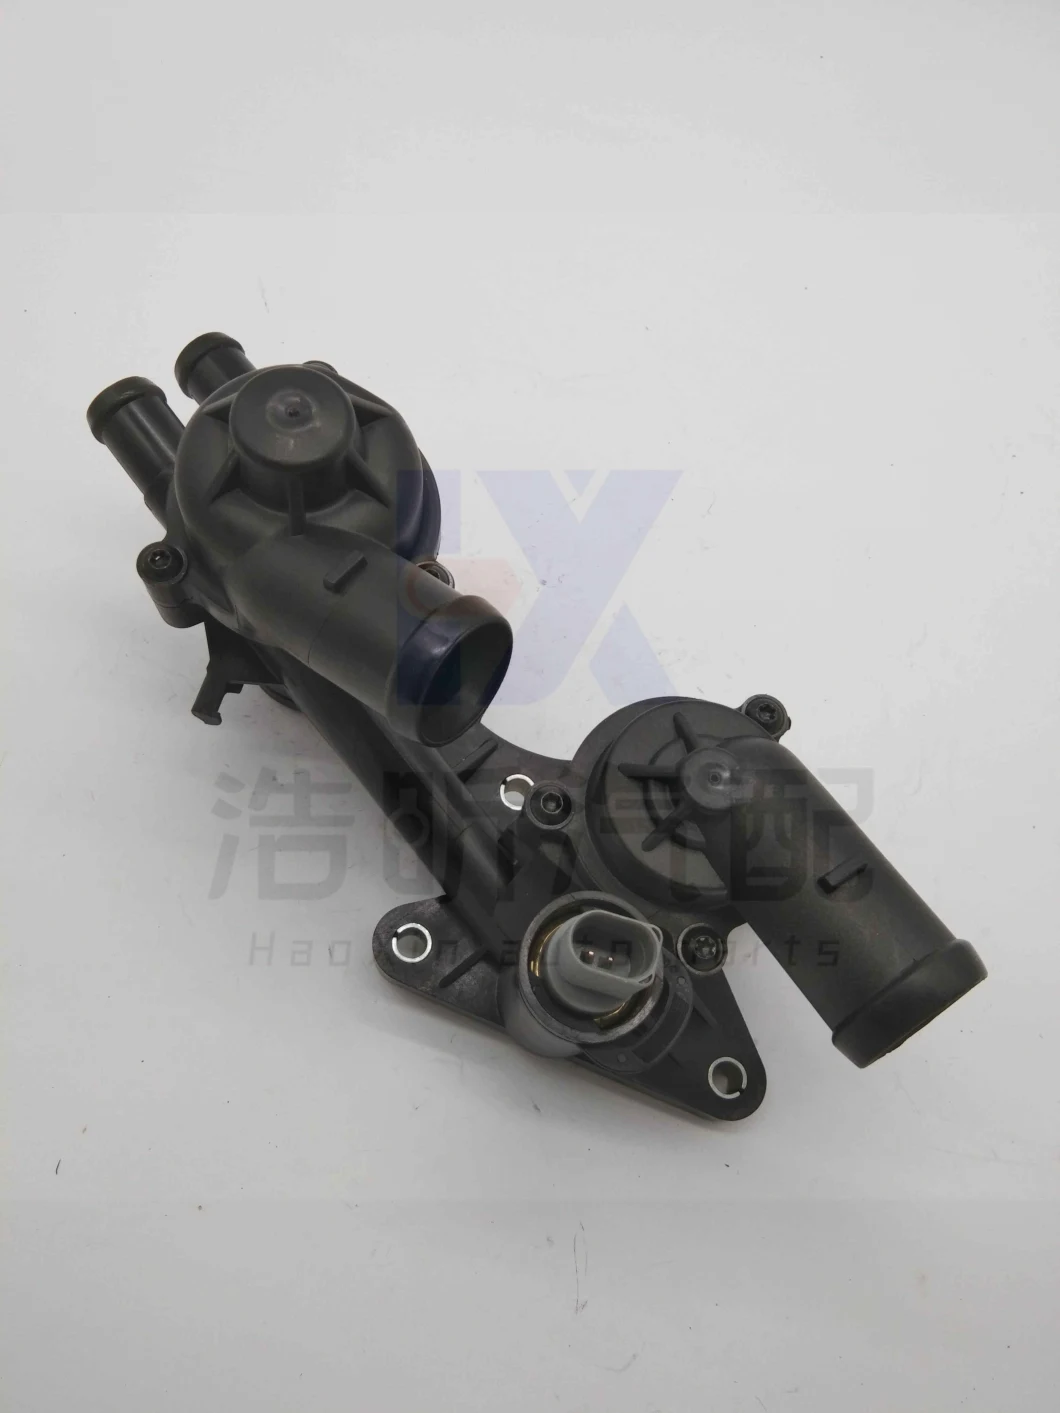 Water Flange Thermostat Housing 03c 121 111p 03c121111p 03c121026s 03c121110A 03c121222t for a-Udi V-W Cooling System